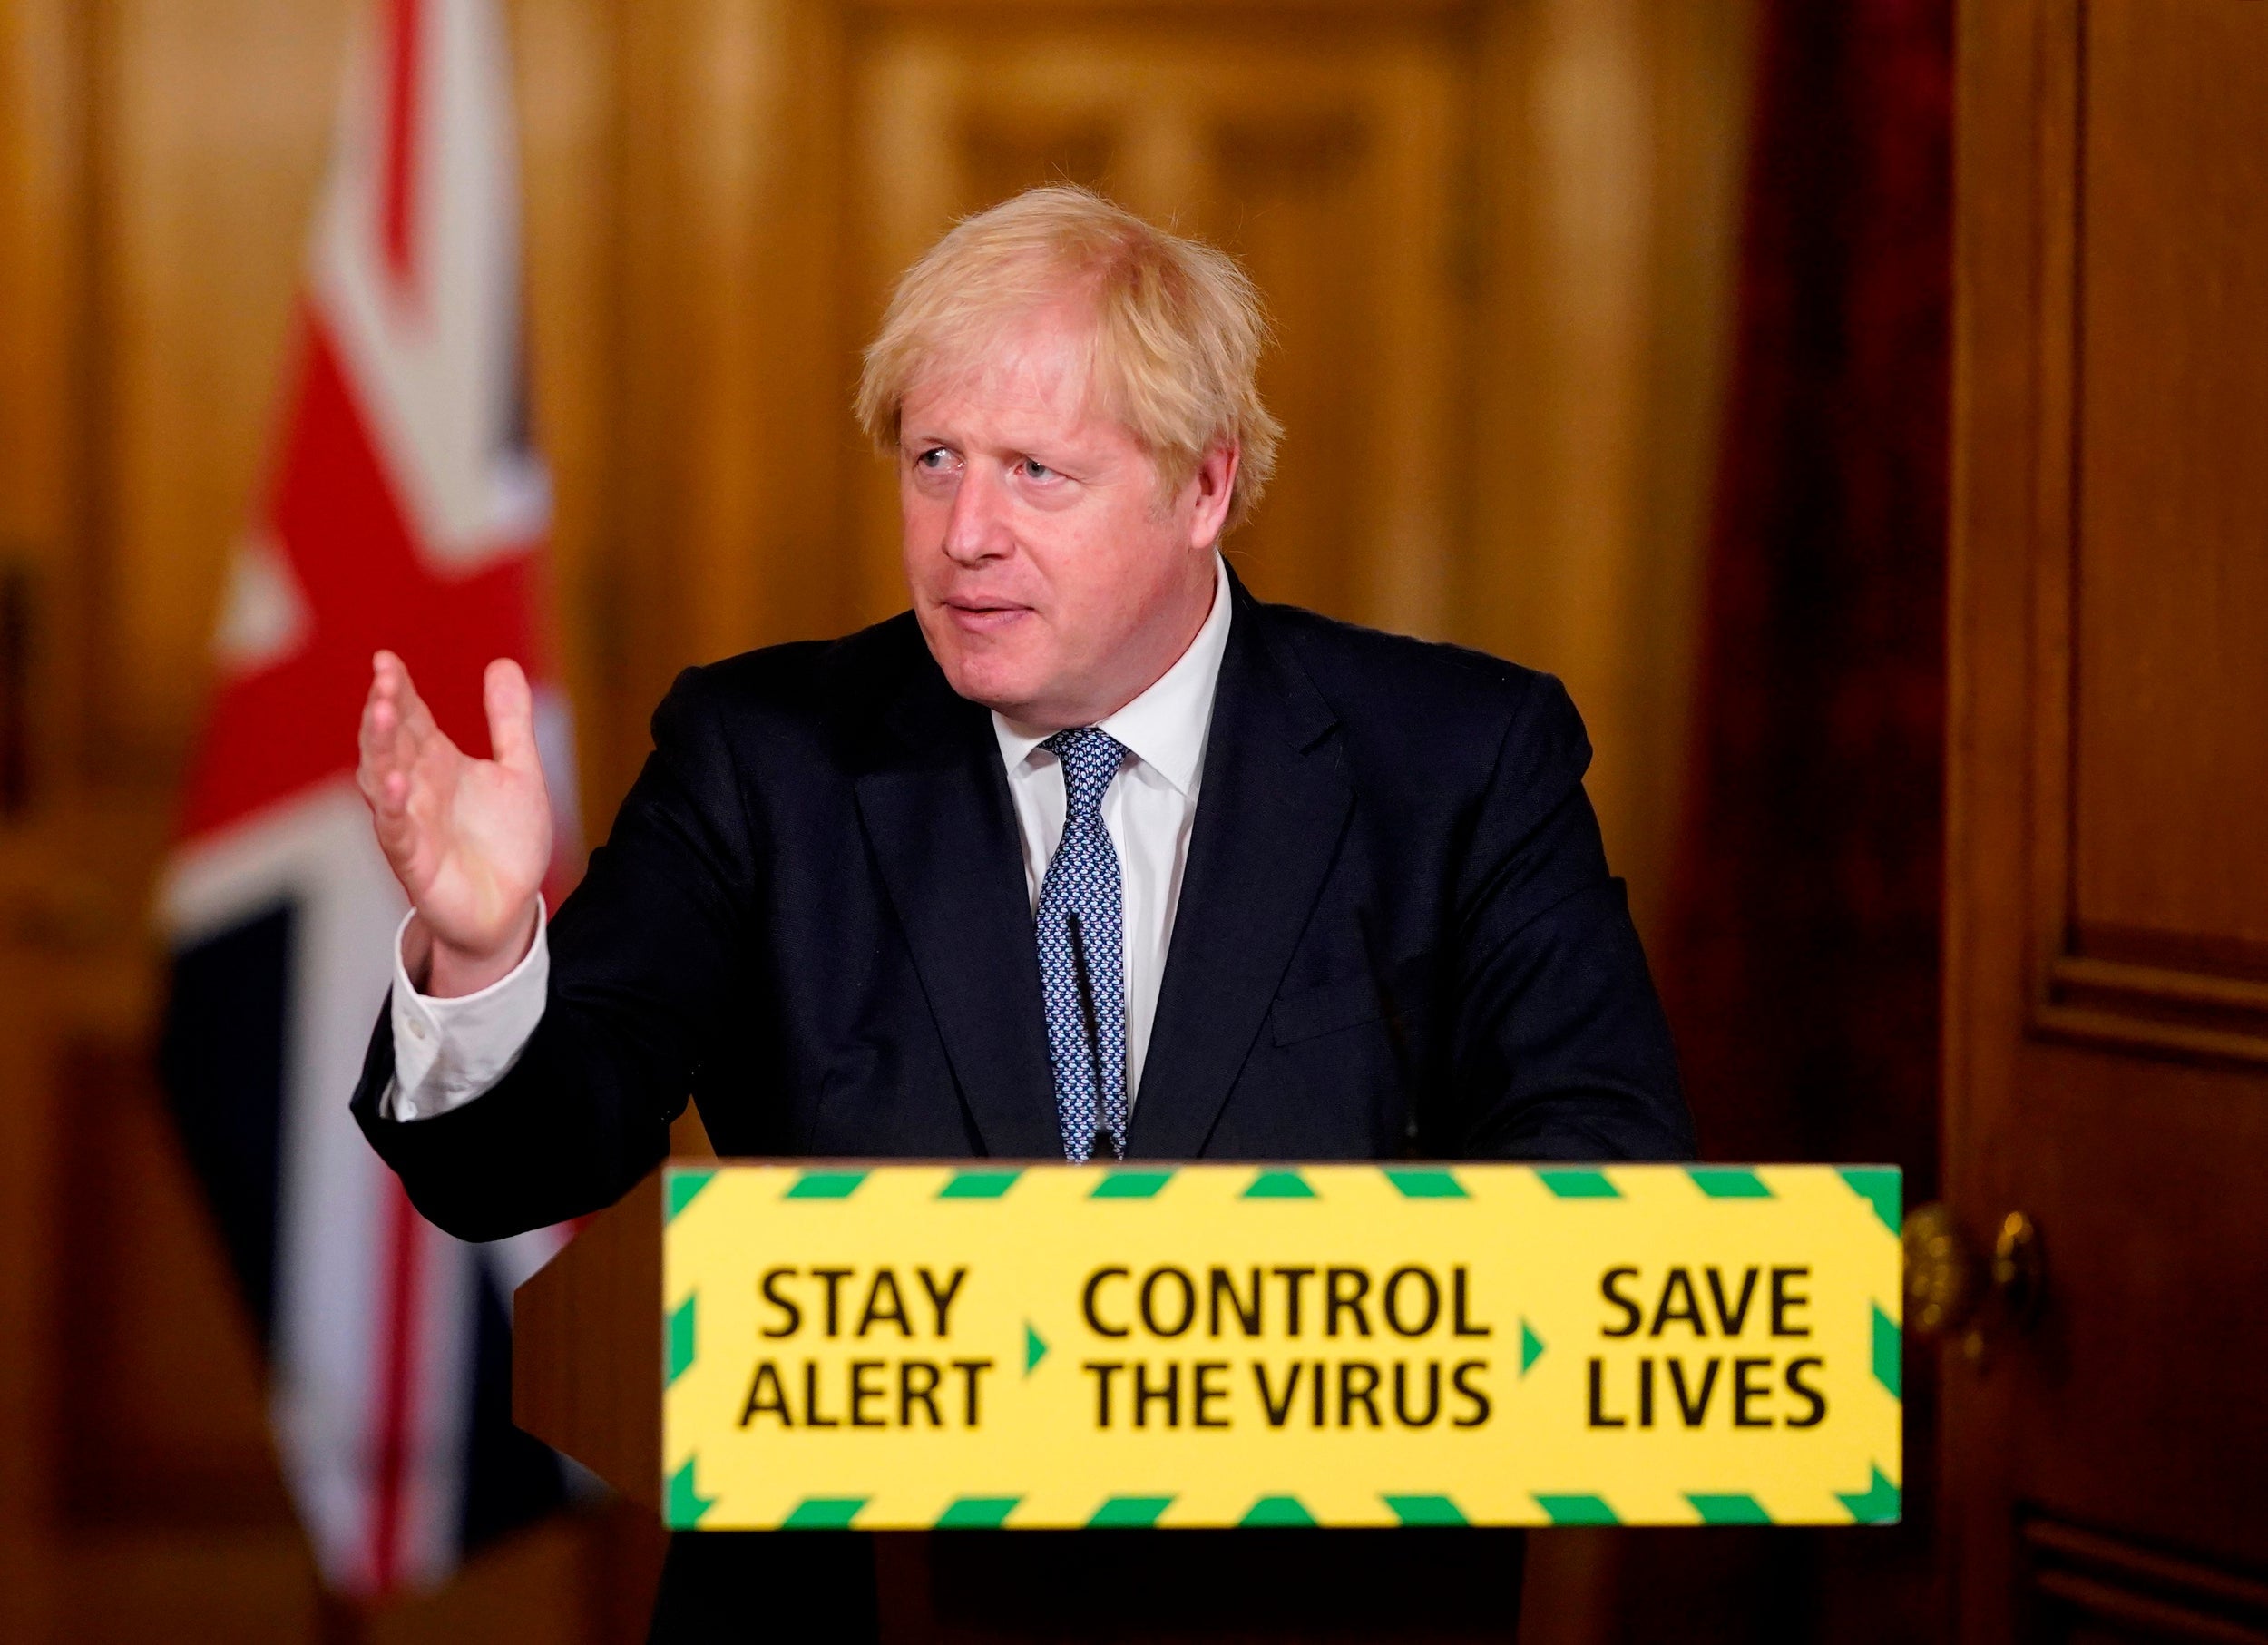 There will be an independent inquiry into Boris Johnson’s handling of the coronavirus